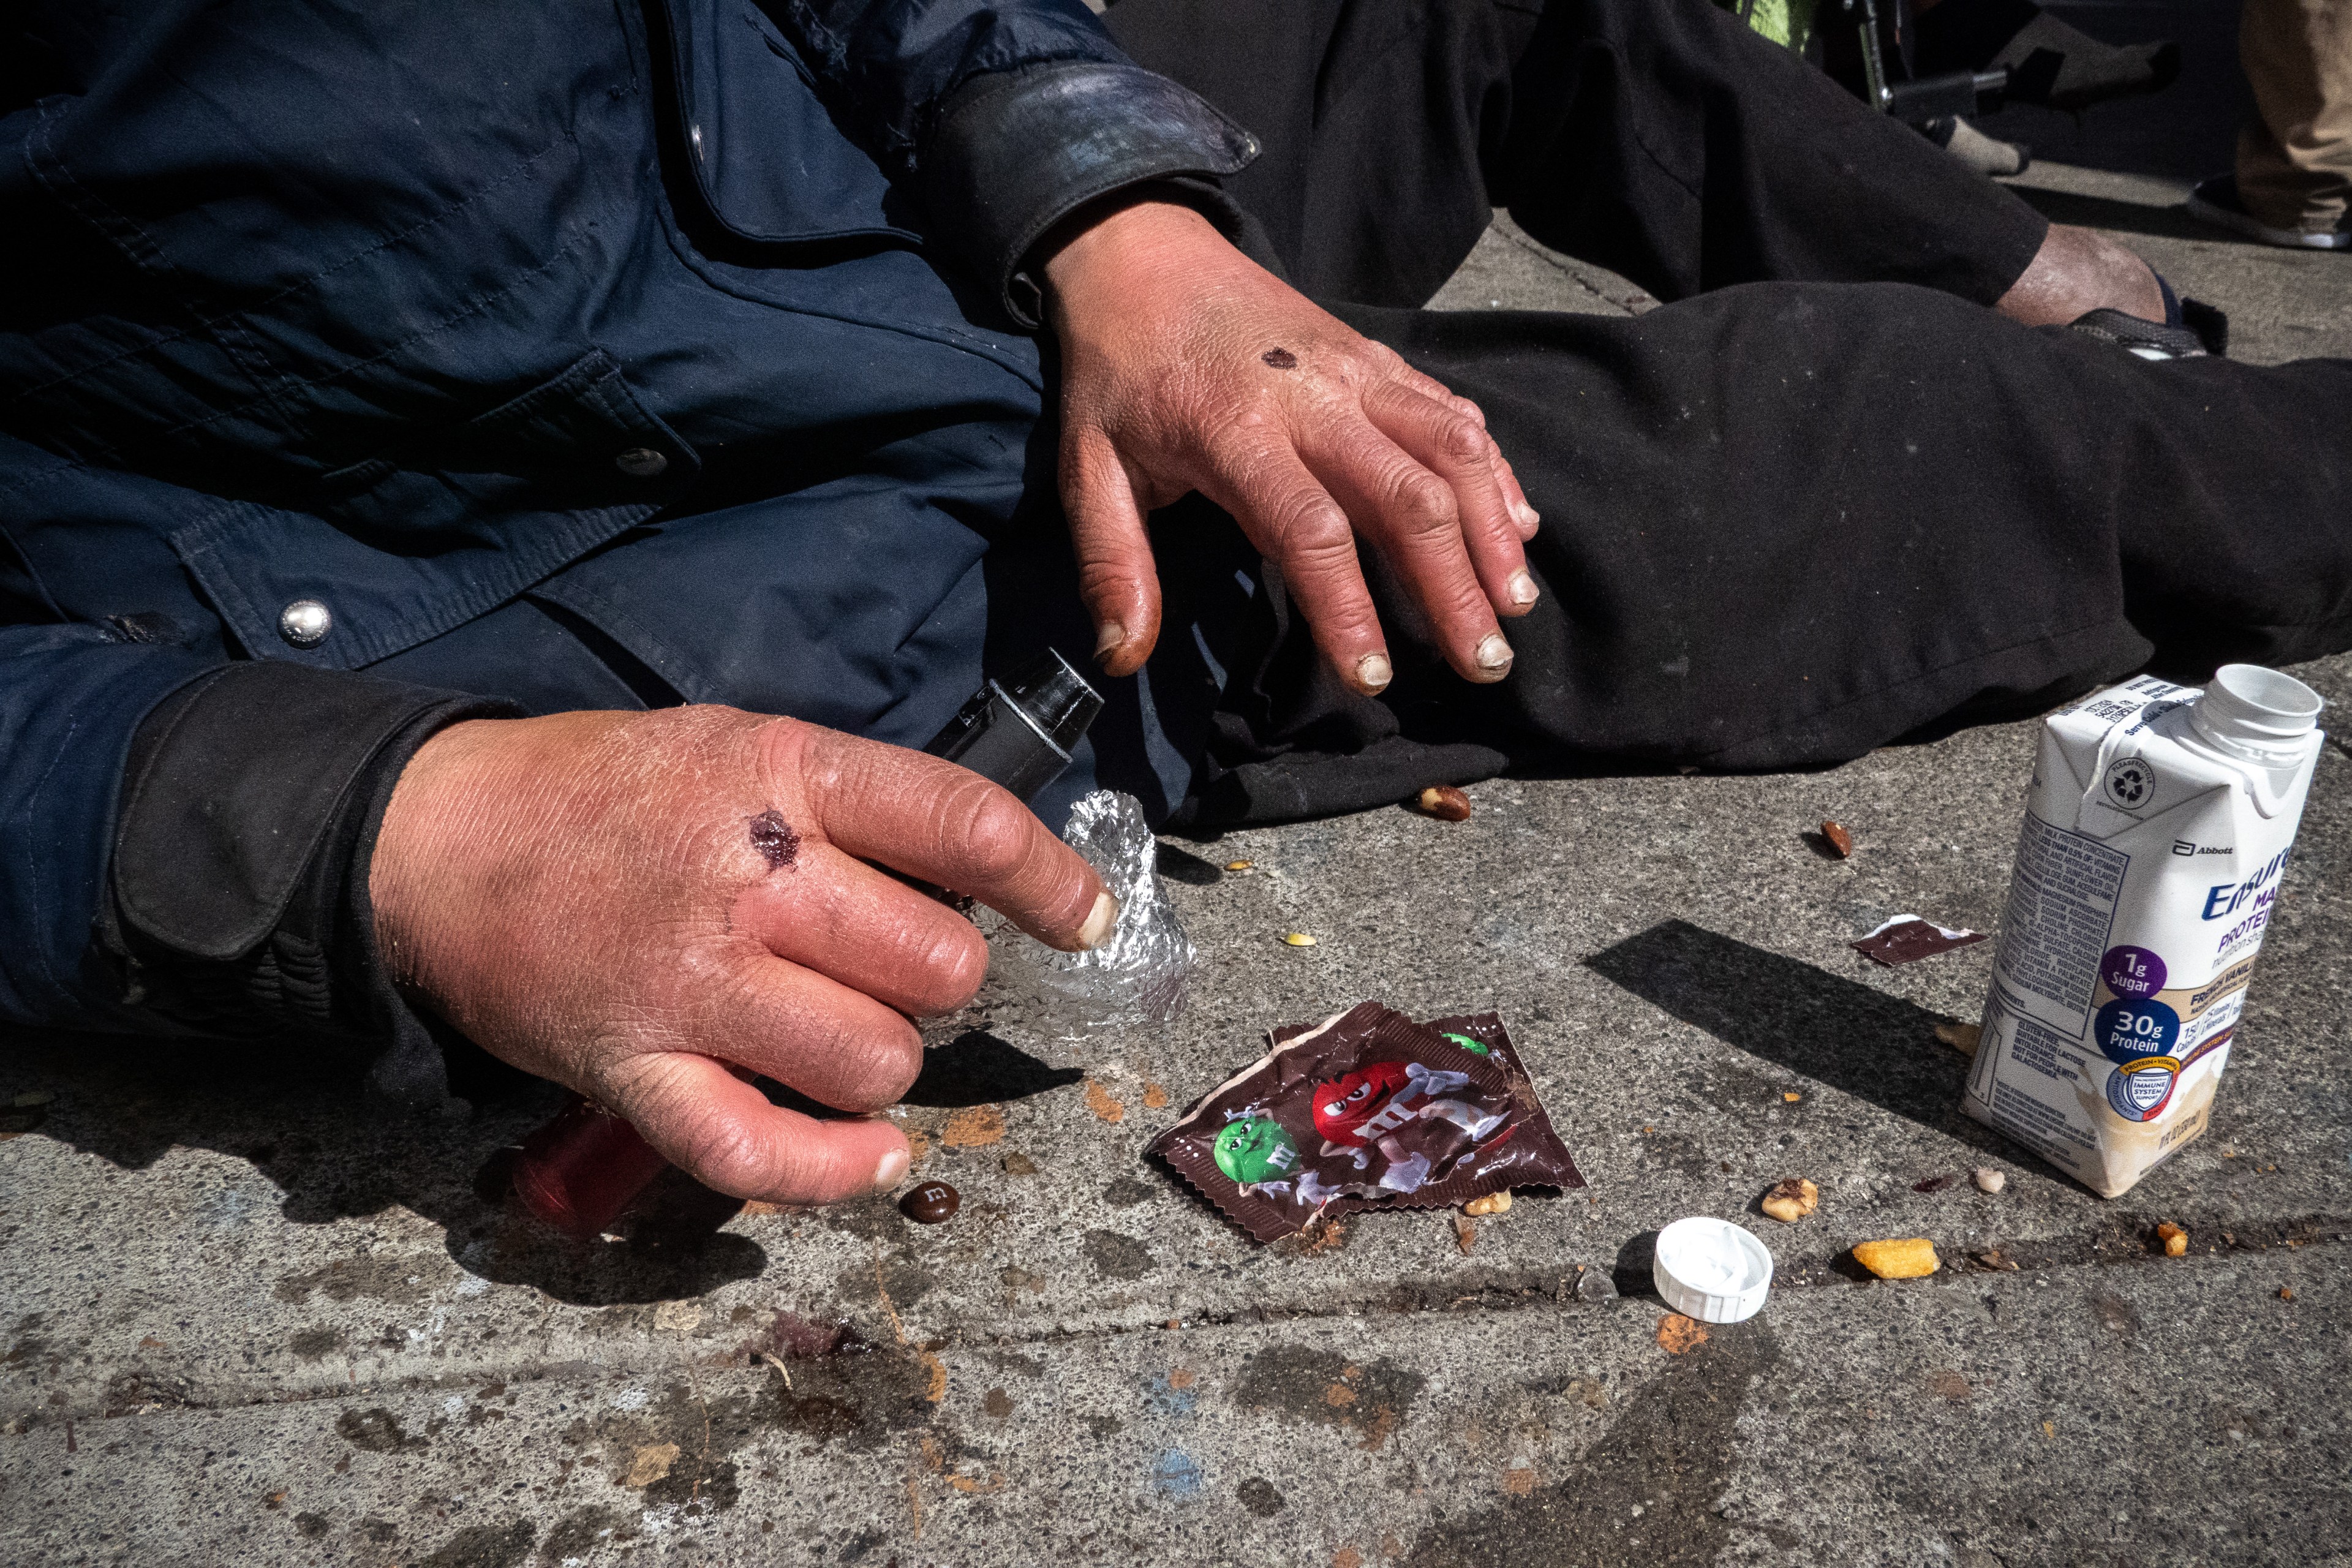 A person is lying on the ground, hands dirty with visible sores, near a spilled nutritional drink and a candy wrapper.